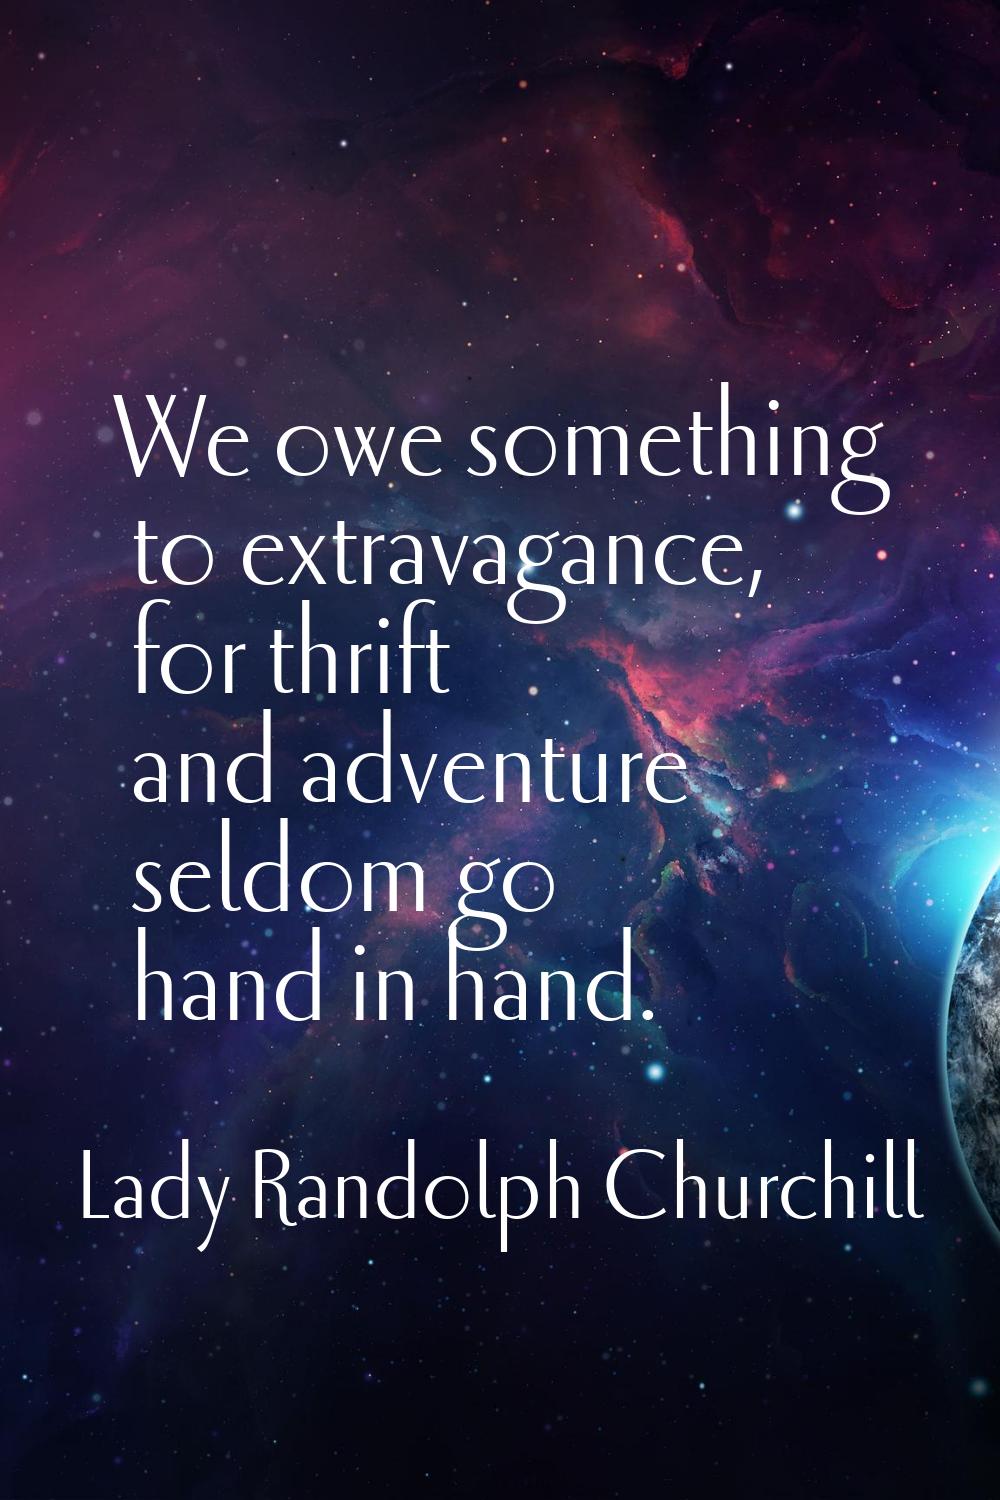 We owe something to extravagance, for thrift and adventure seldom go hand in hand.